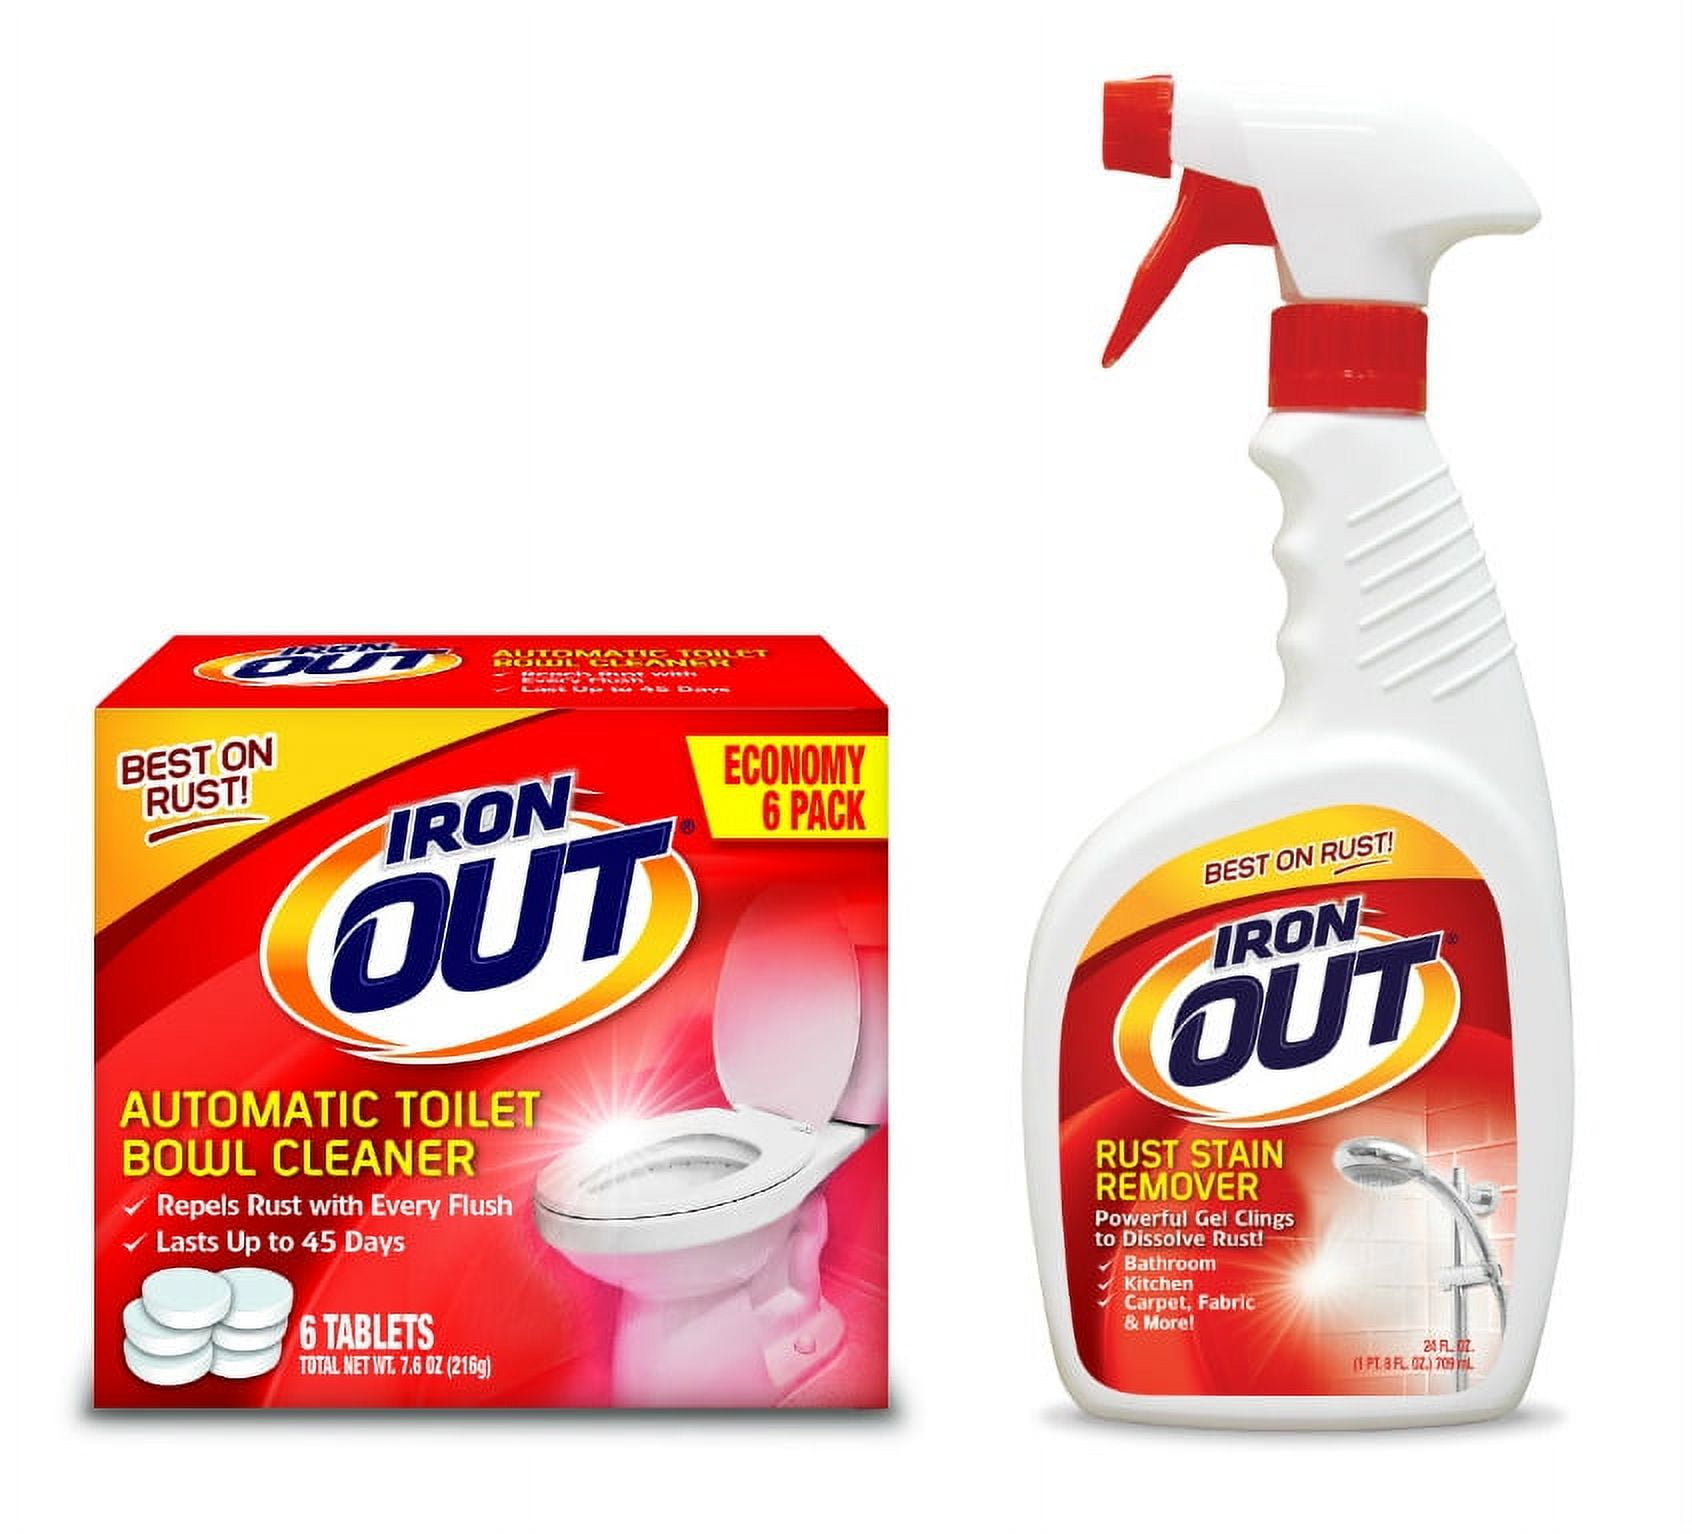 Super Iron Out All-purpose Rust And Stain Remover - 28 Ounces